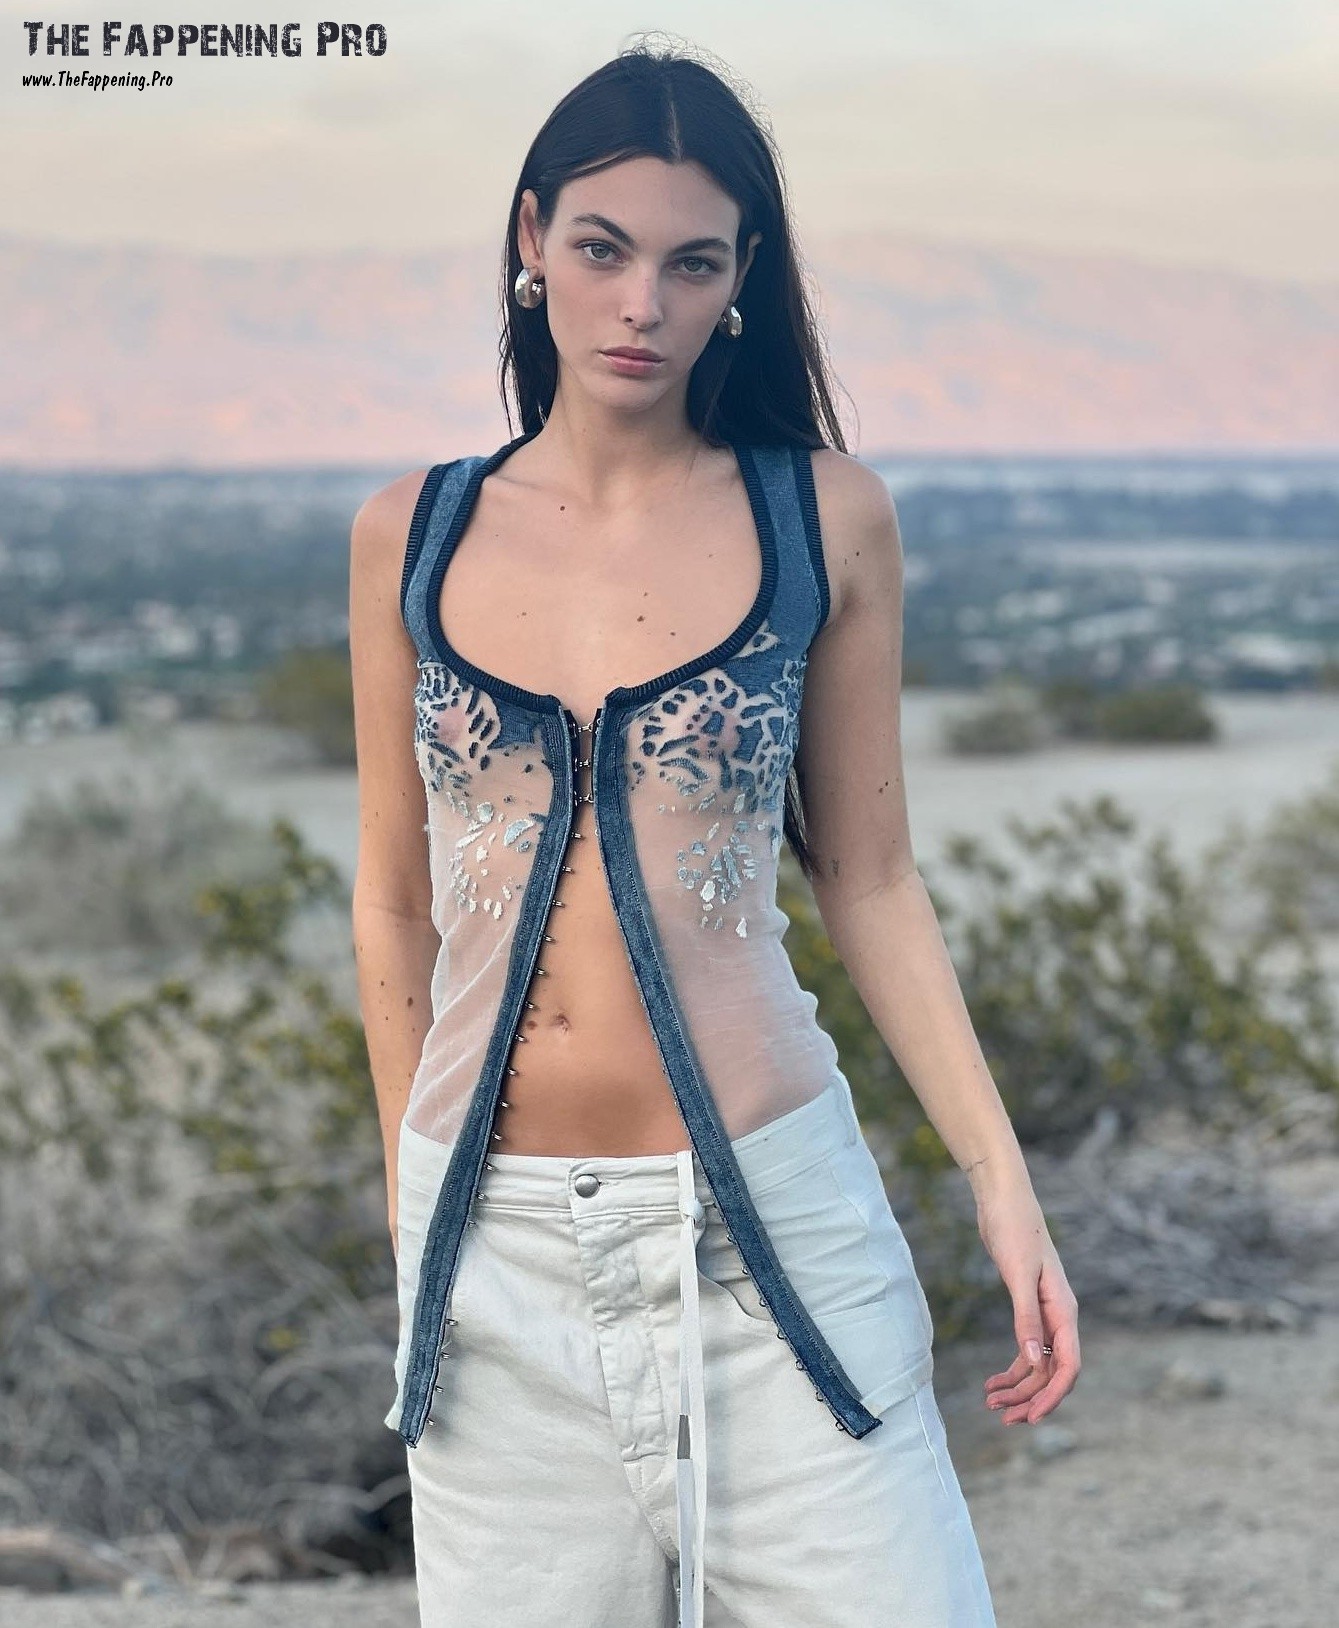 Get ready to be captivated by the stunning Italian model, Vittoria Ceretti, as she mesmerizes in a new candid photo shoot at Coachella. Dressed in a see-through top, she confidently flaunts her small yet beloved tits, causing a frenzy among her fans. The photos of Vittoria braless are nothing short of breathtaking, showcasing her natural beauty in all its glory. Don't miss out on this sensational display of elegance and allure.